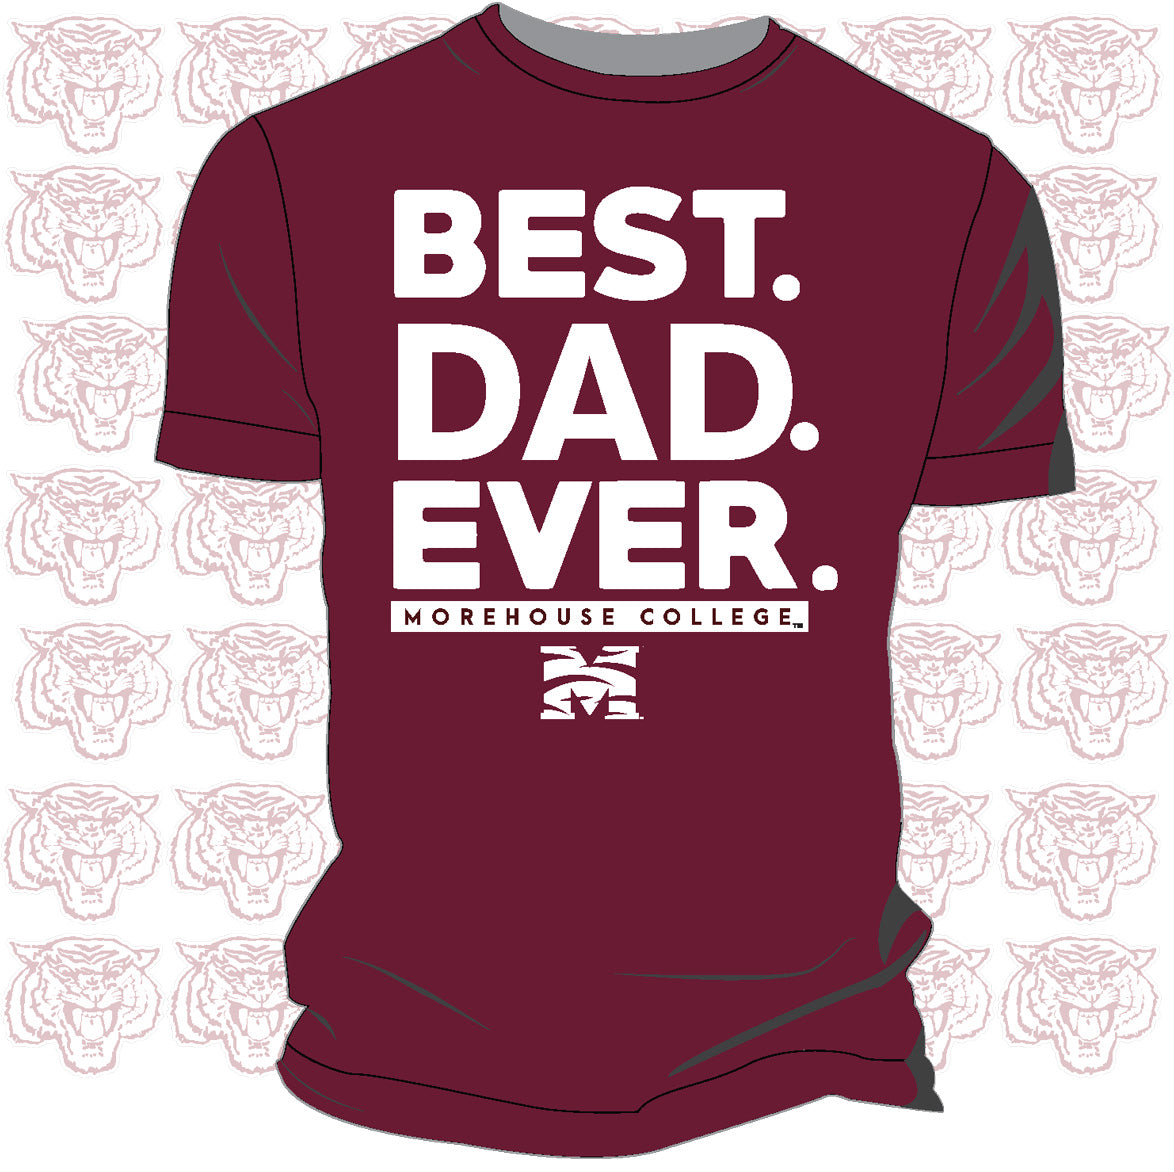 MOREHOUSE | BEST "DAD" EVER Maroon Unisex Tees (Z)